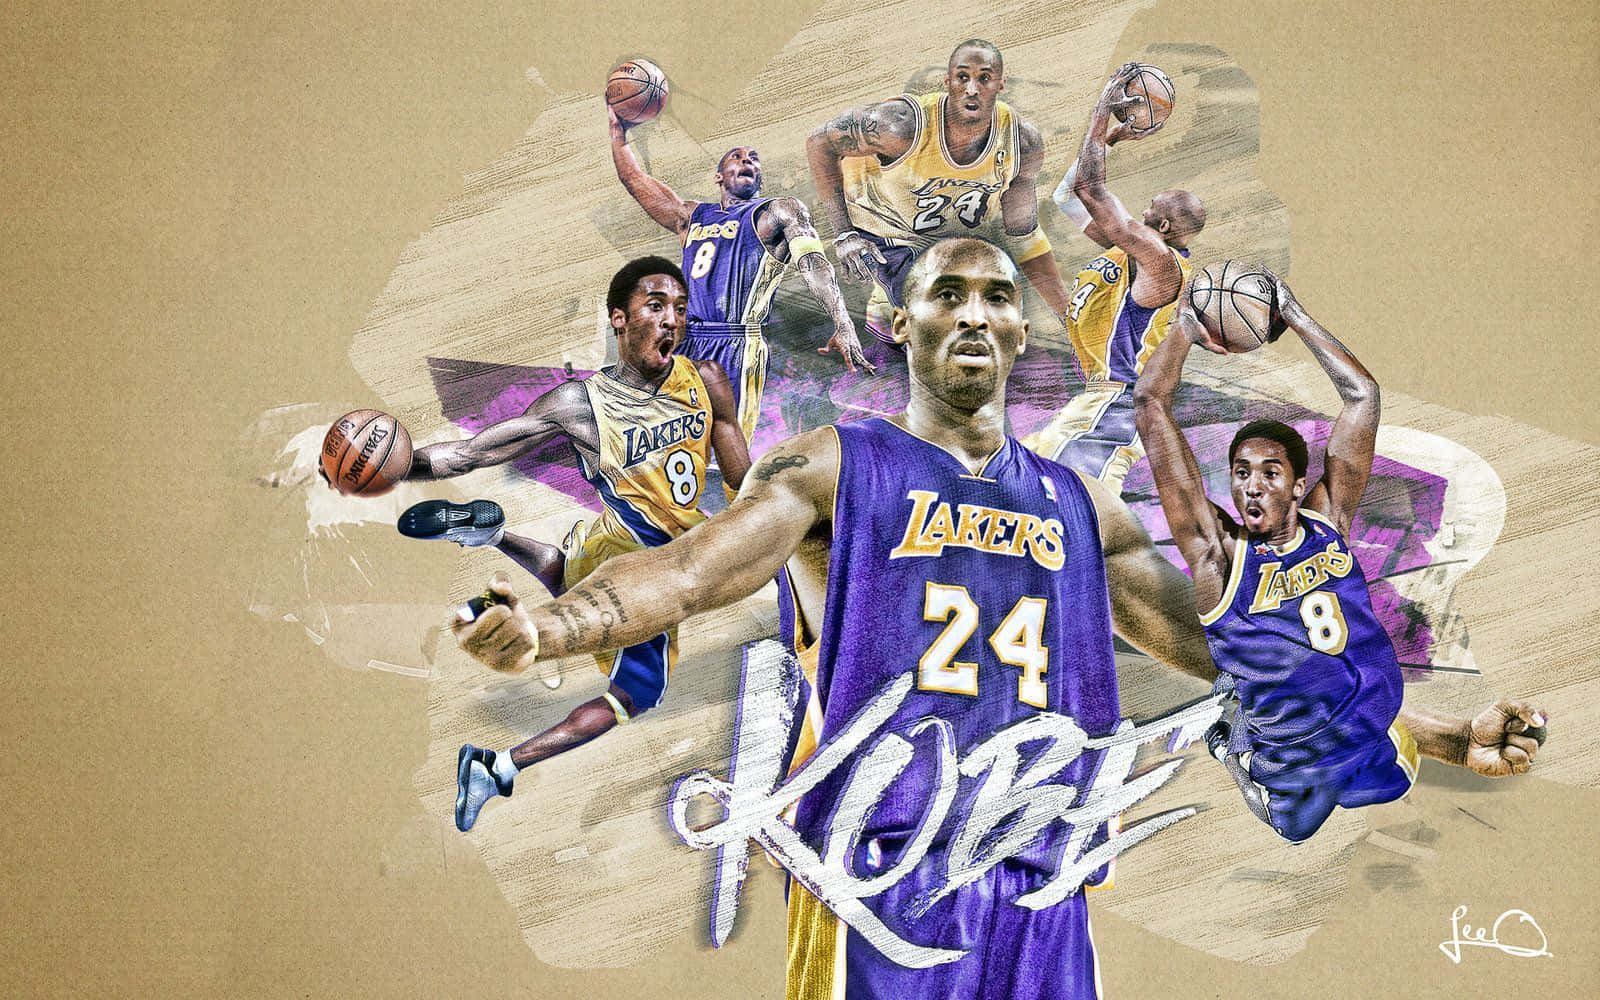 Download Legendary Los Angeles Laker Kobe Bryant In Action On The